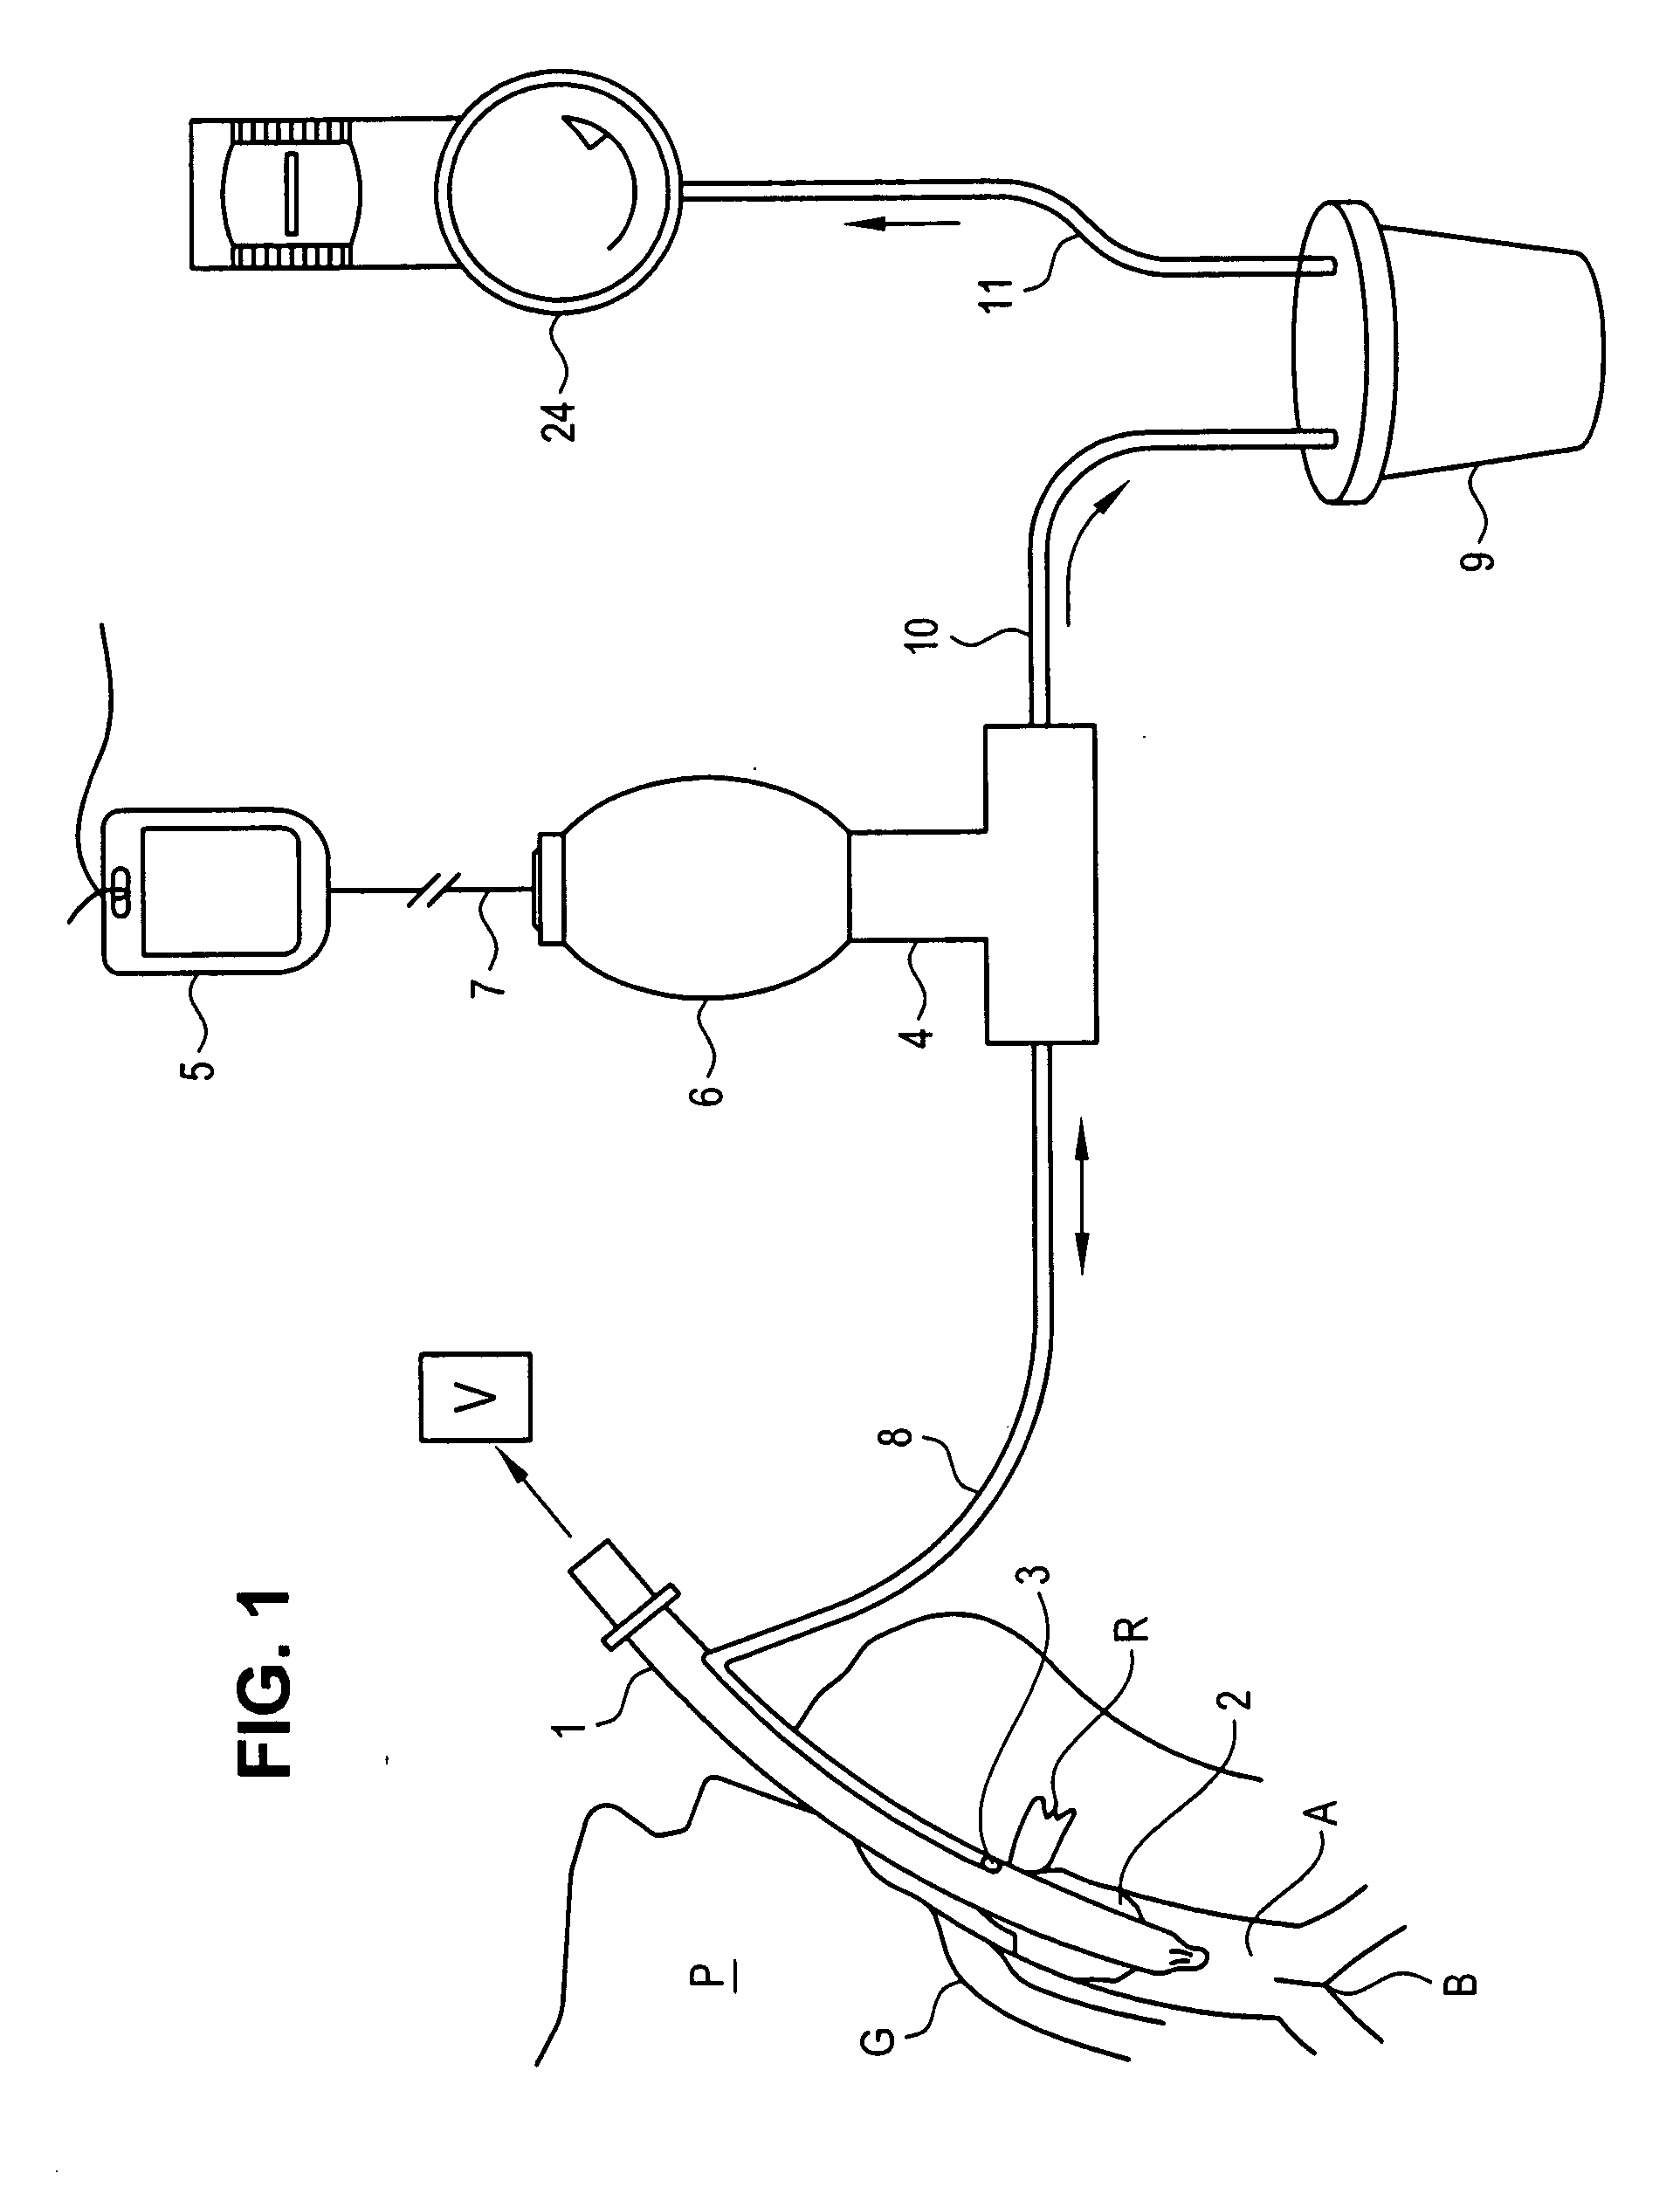 Apparatus for vacuum-assisted irrigation and drainage of a body cavity